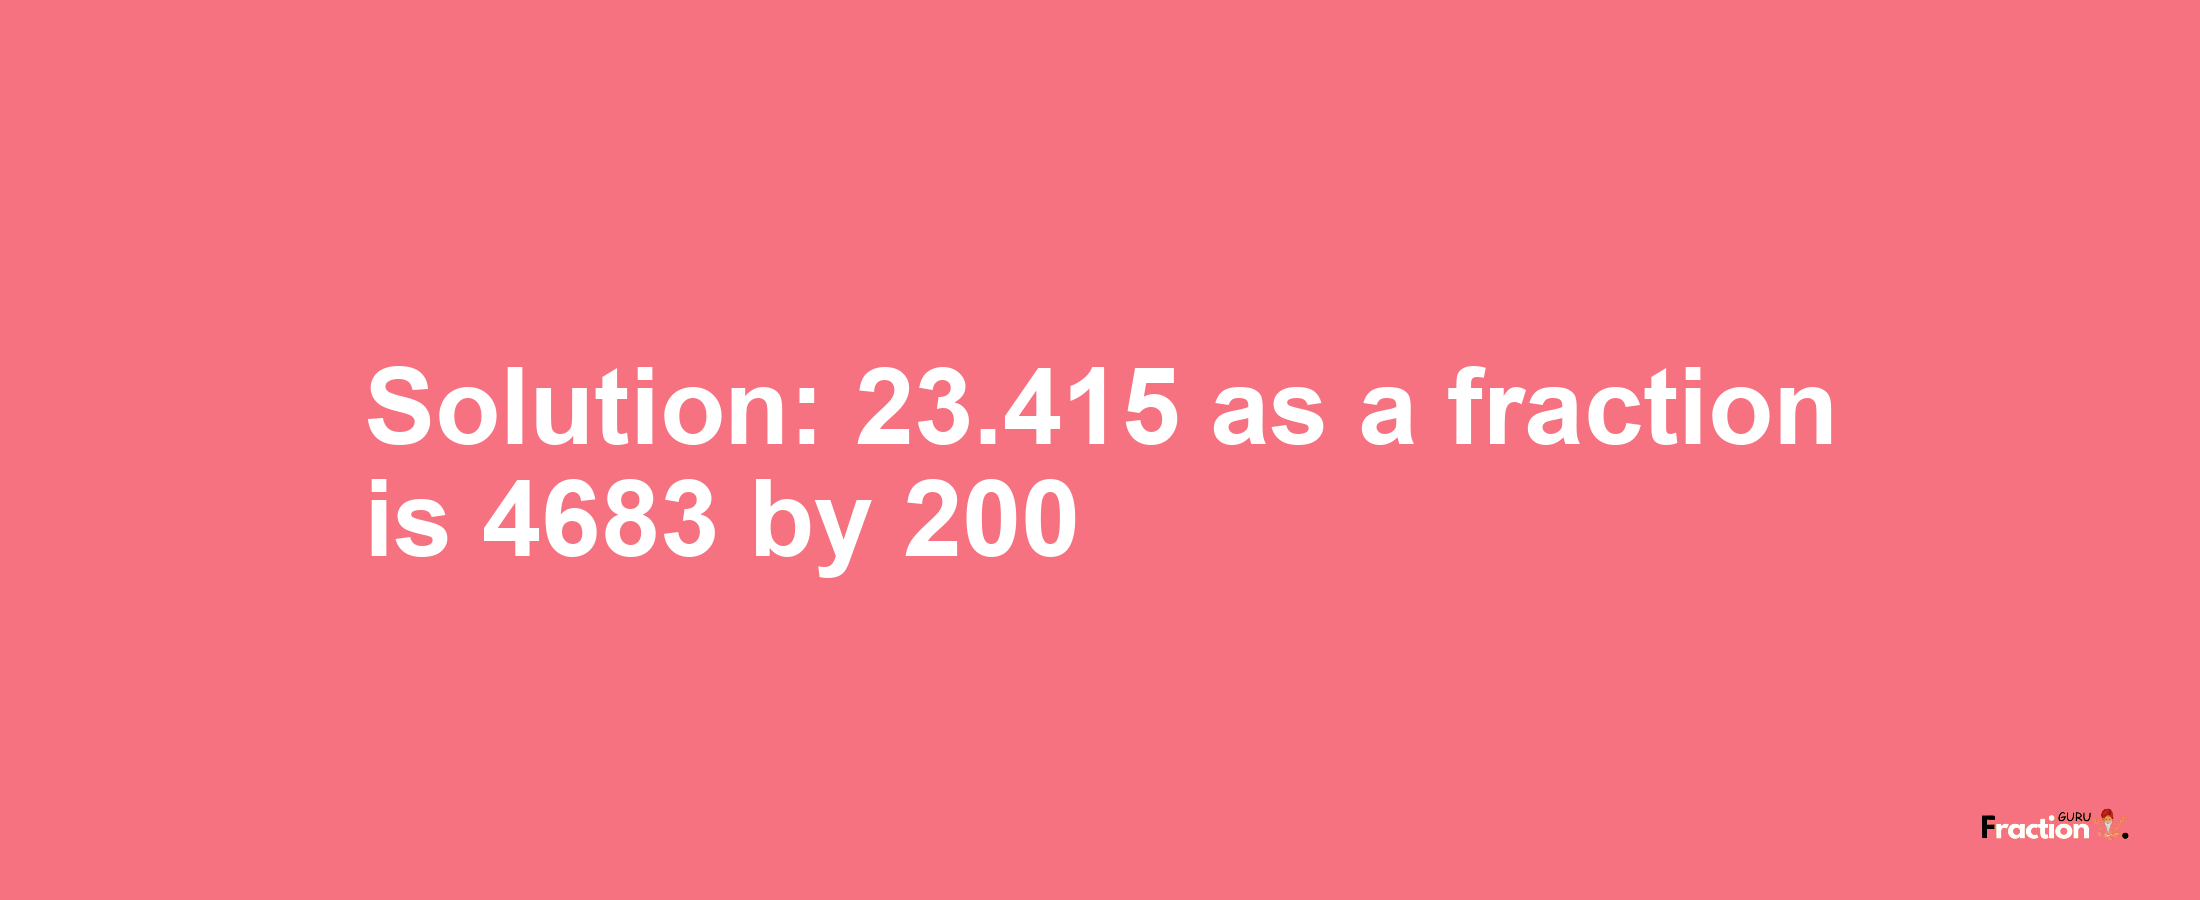 Solution:23.415 as a fraction is 4683/200